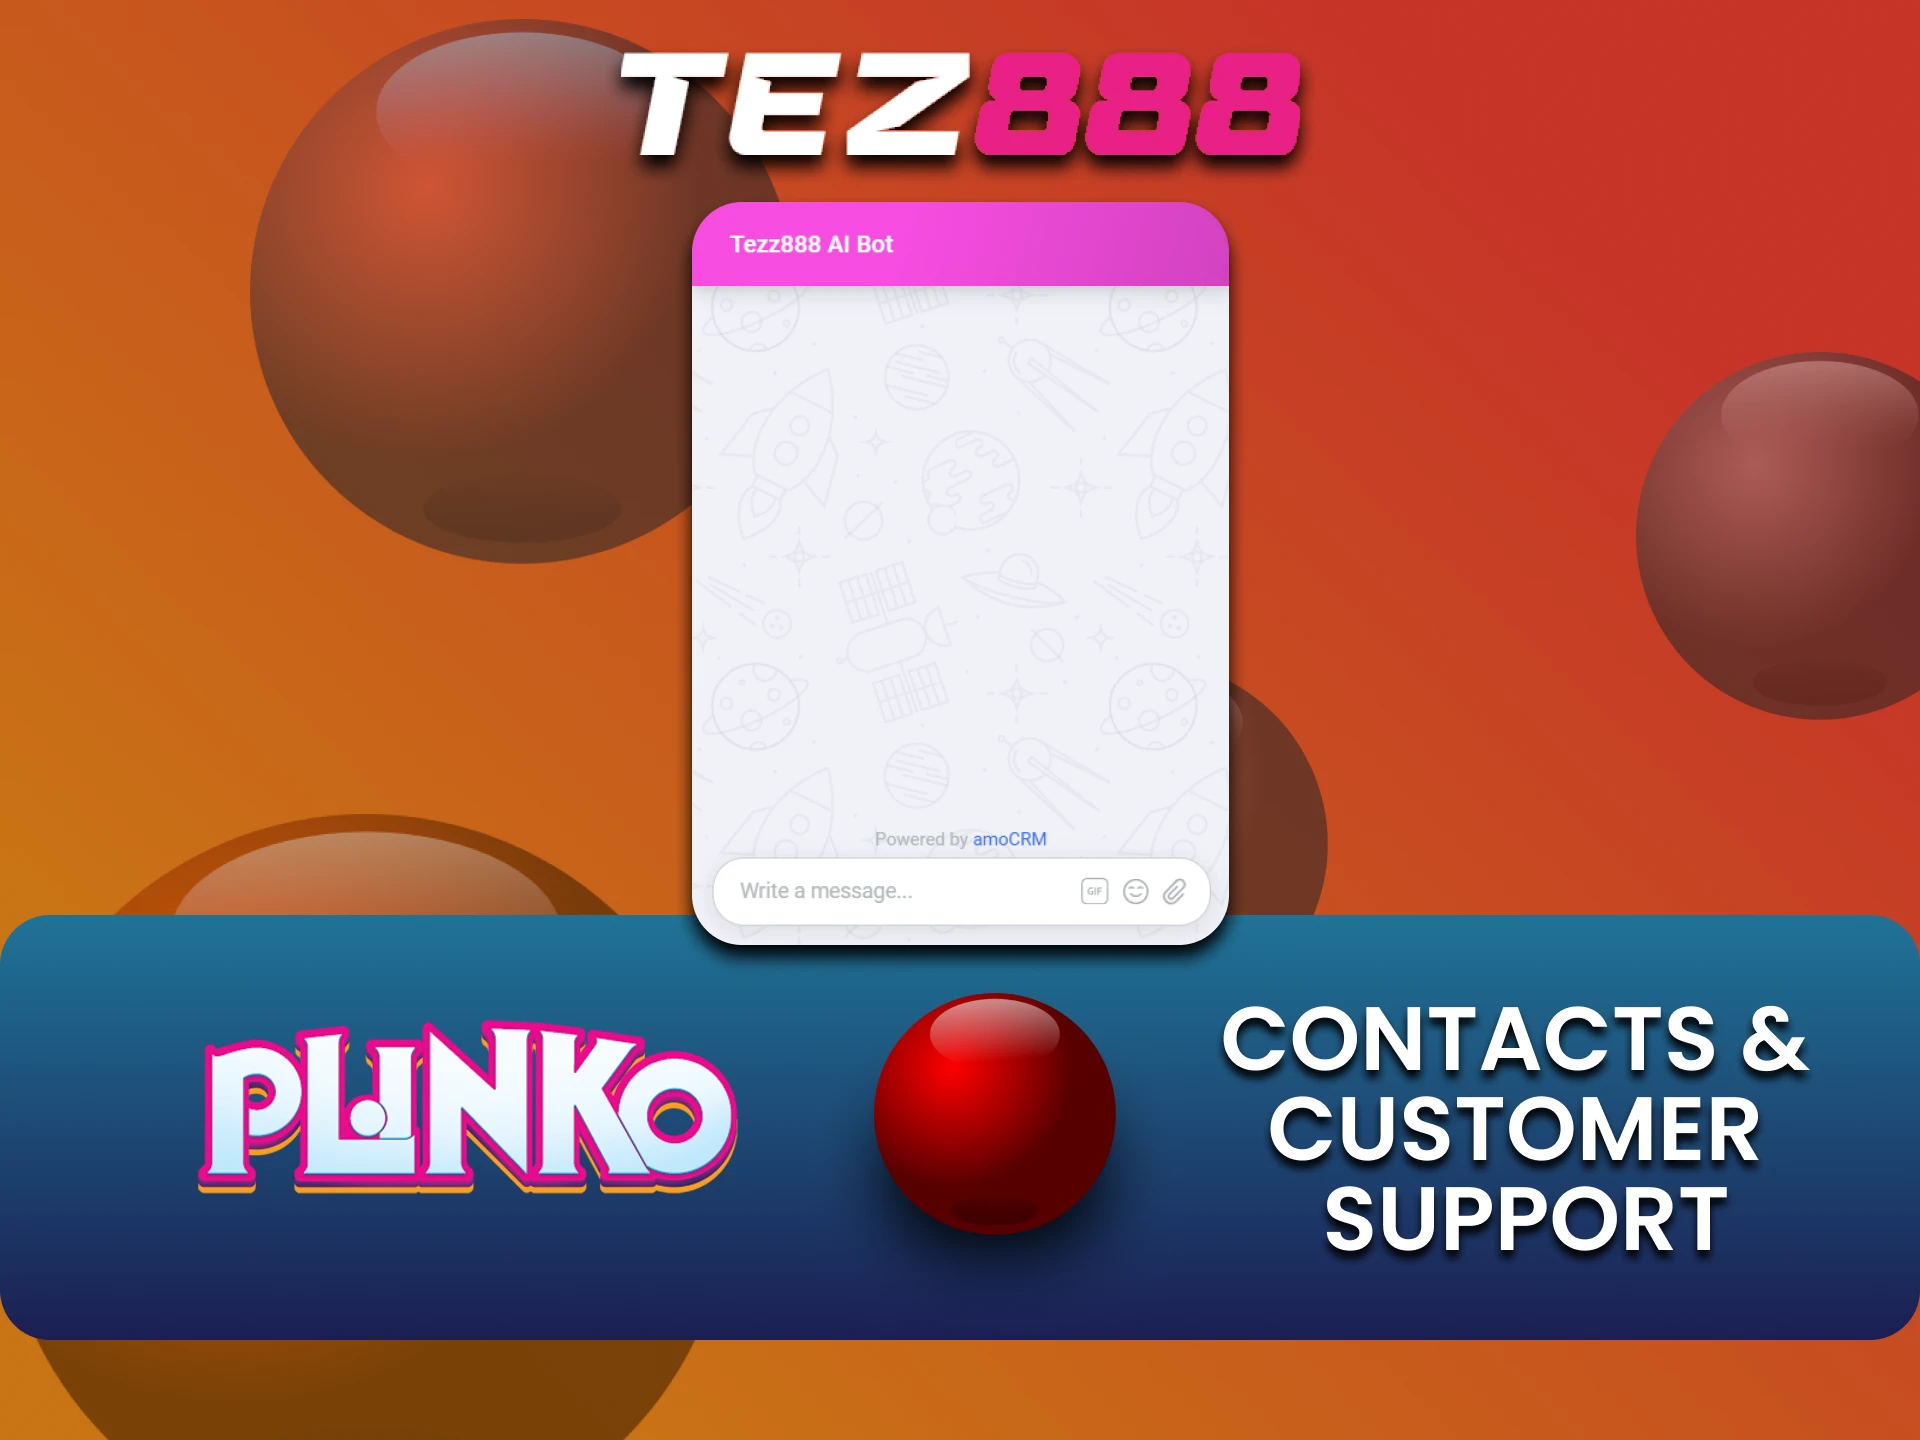 We'll show you how to contact the Tez888 team for the Plinko game.